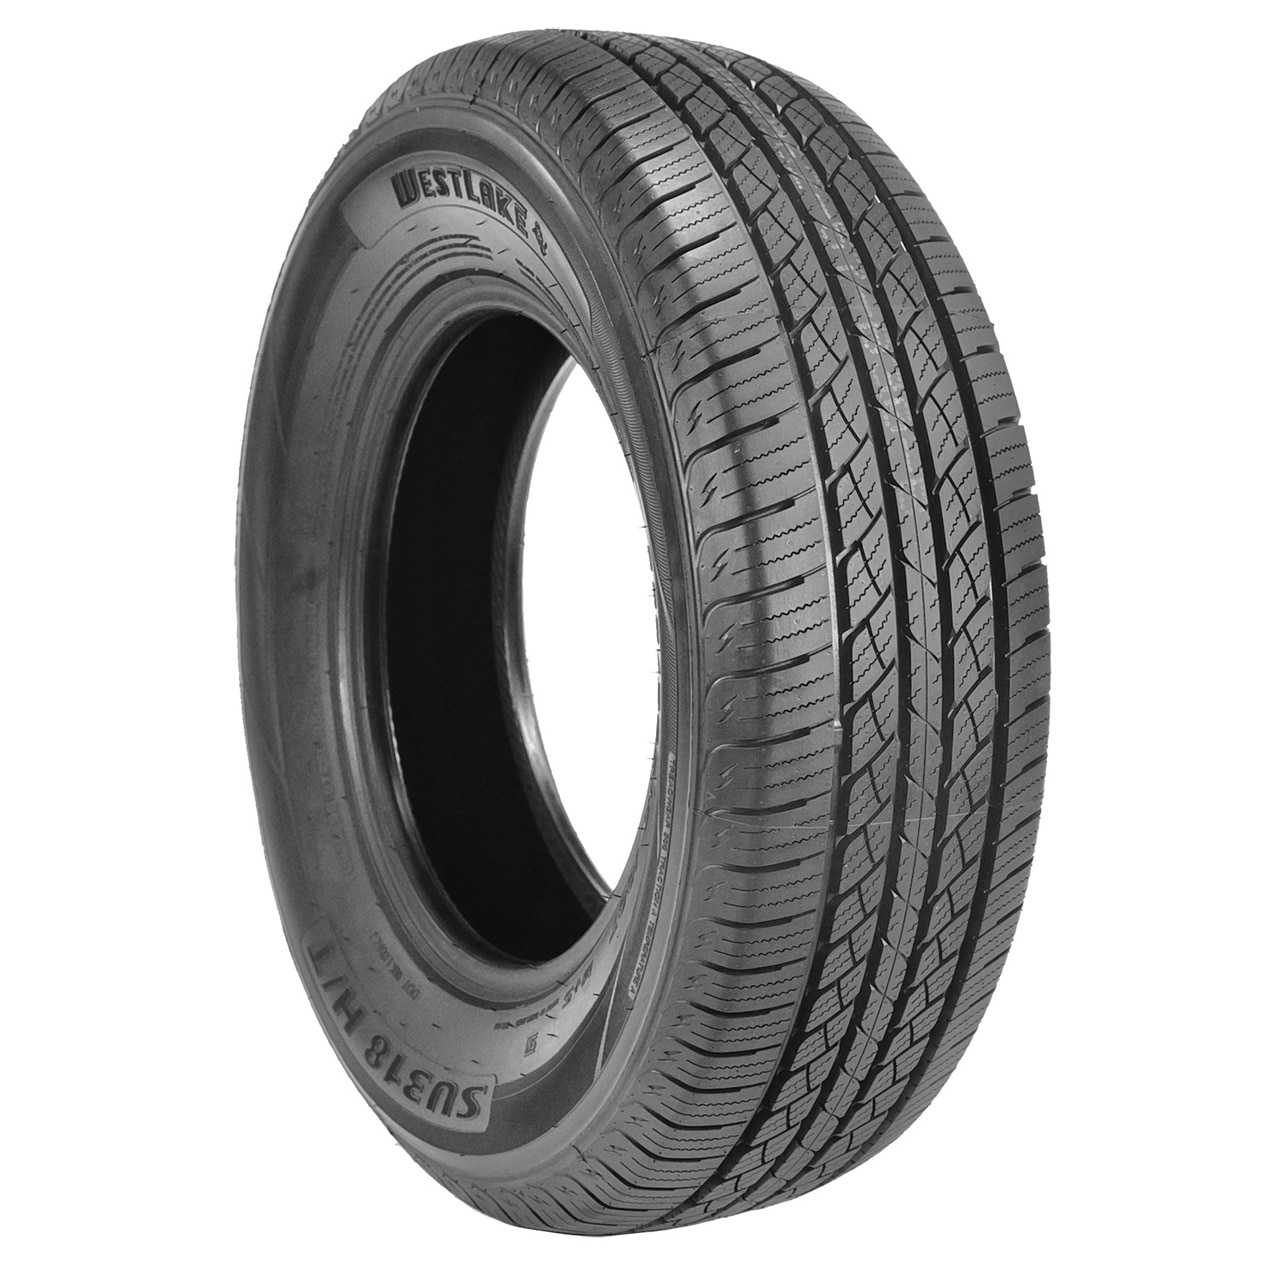 Westlake SU318 Tire Review & Rating - Tire Reviews and More